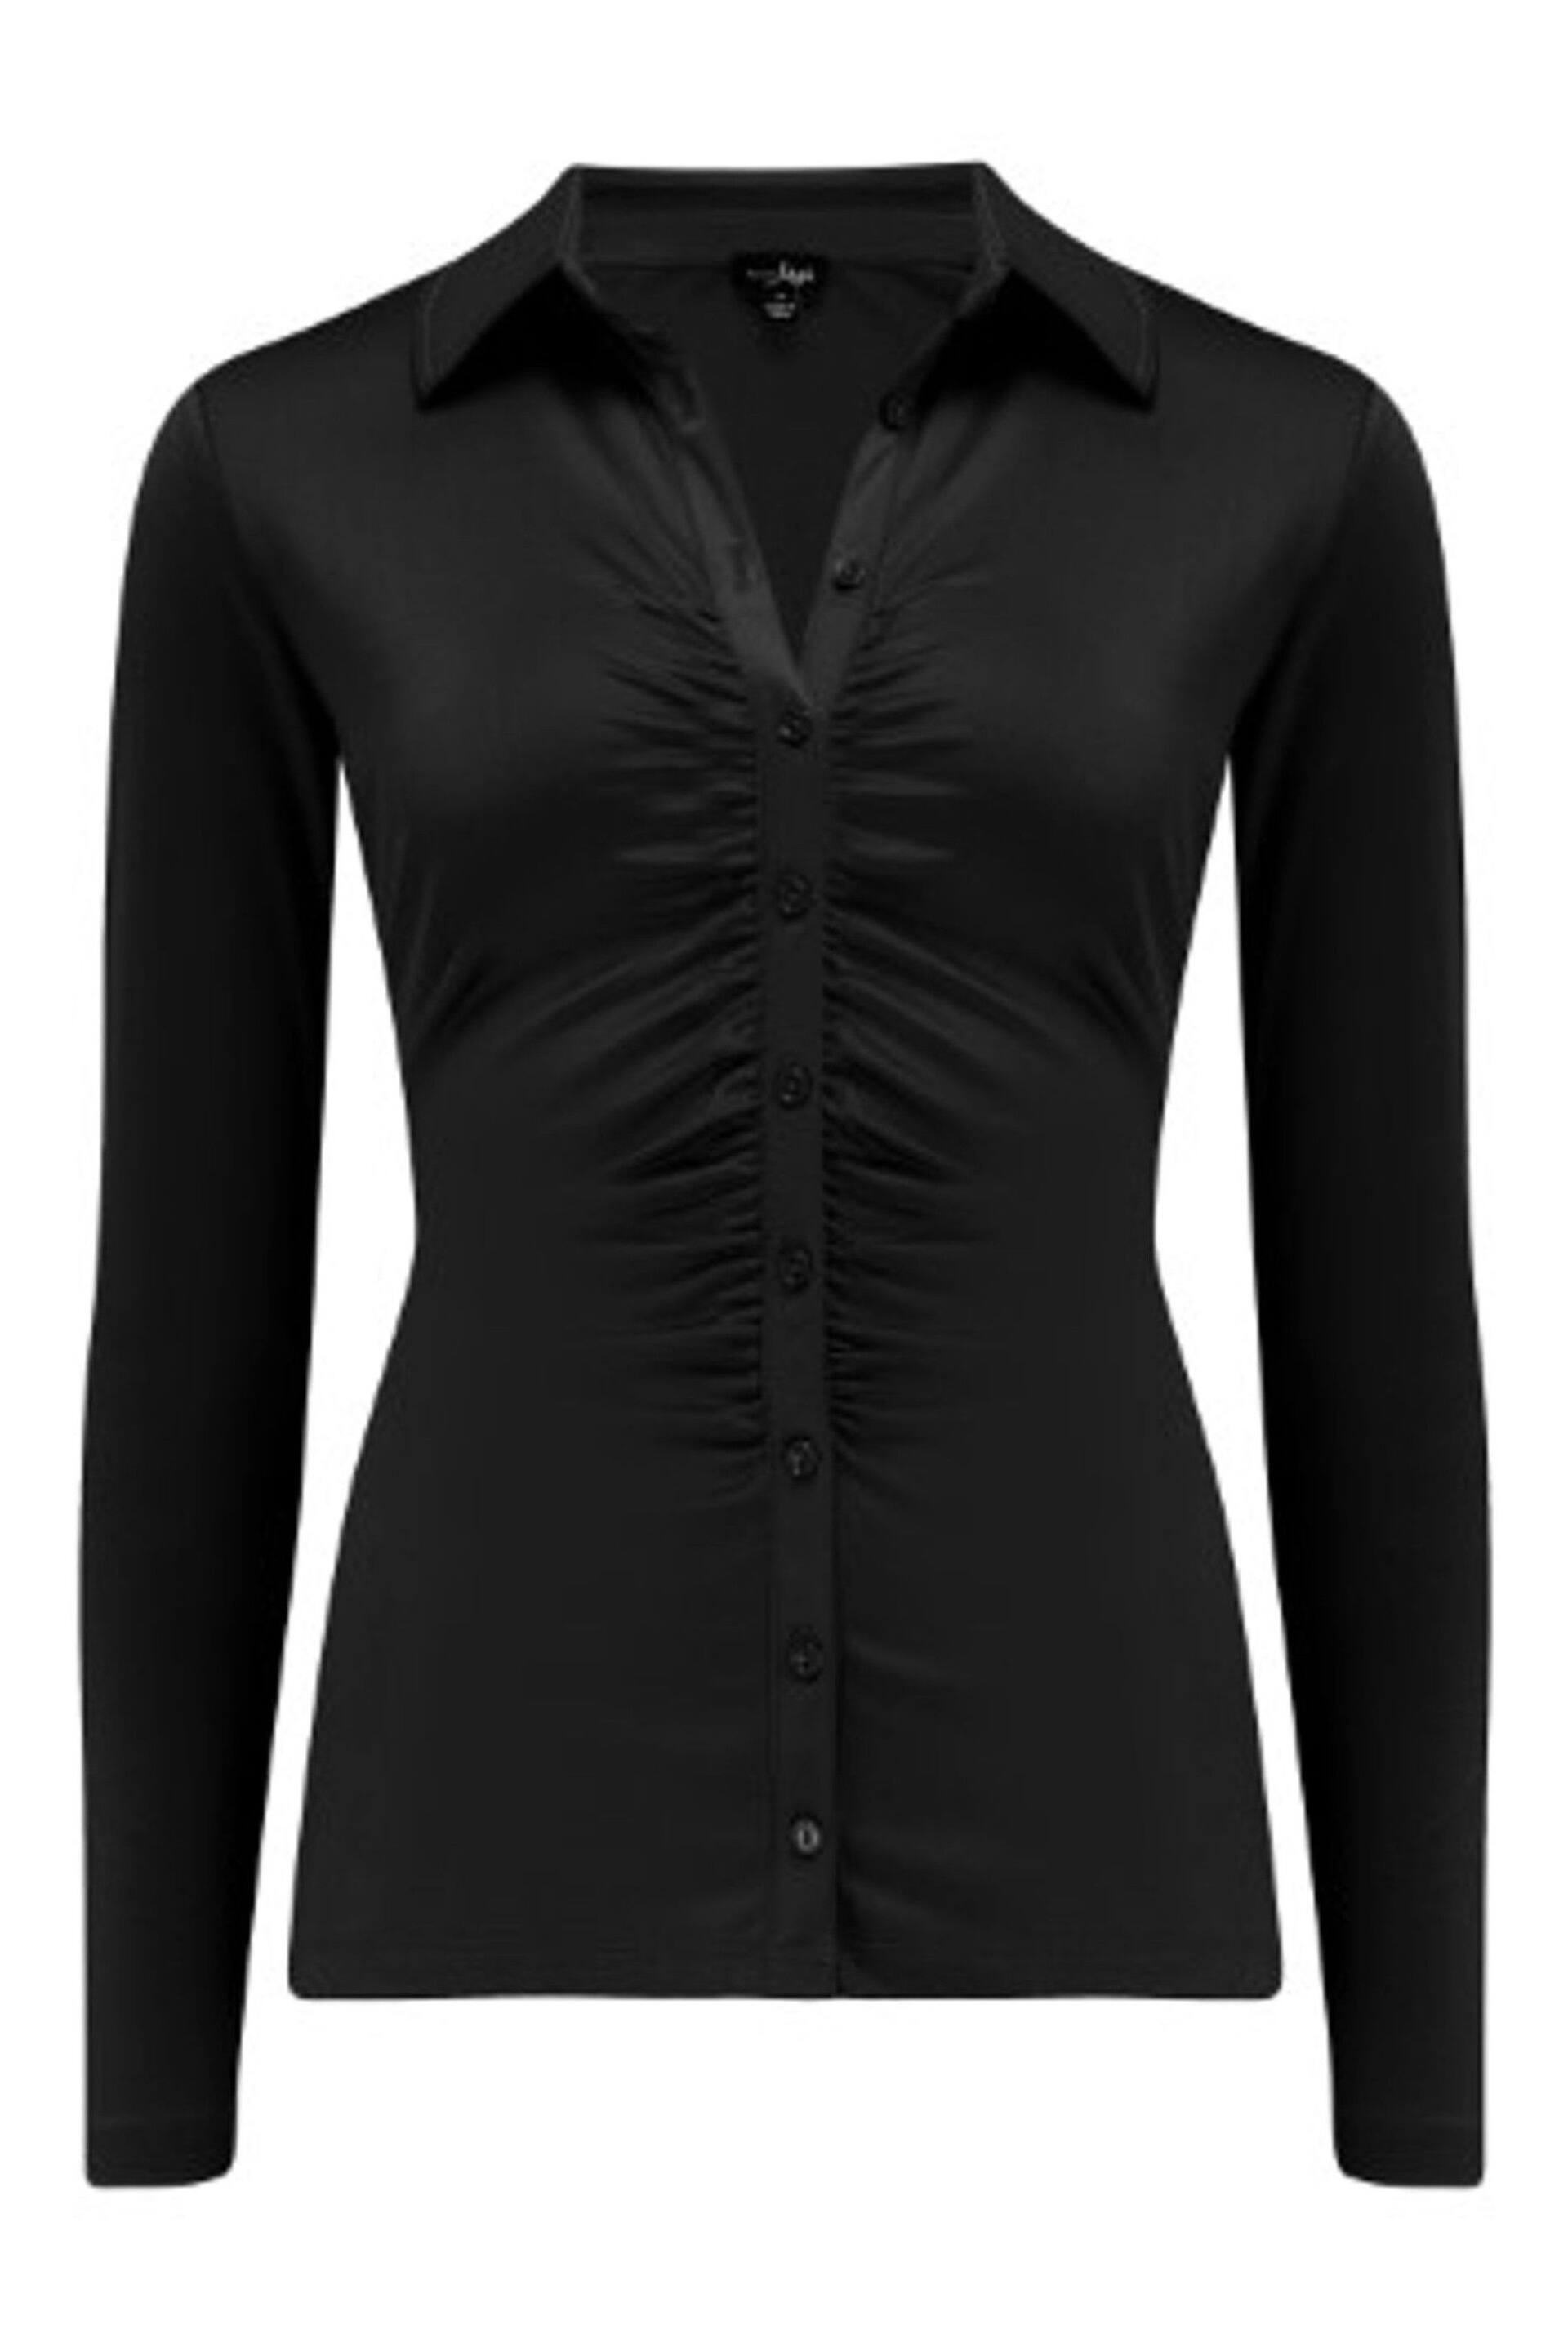 Pour Moi Black Brooke Shine Ruched Front Stretch Shirt - Image 4 of 5